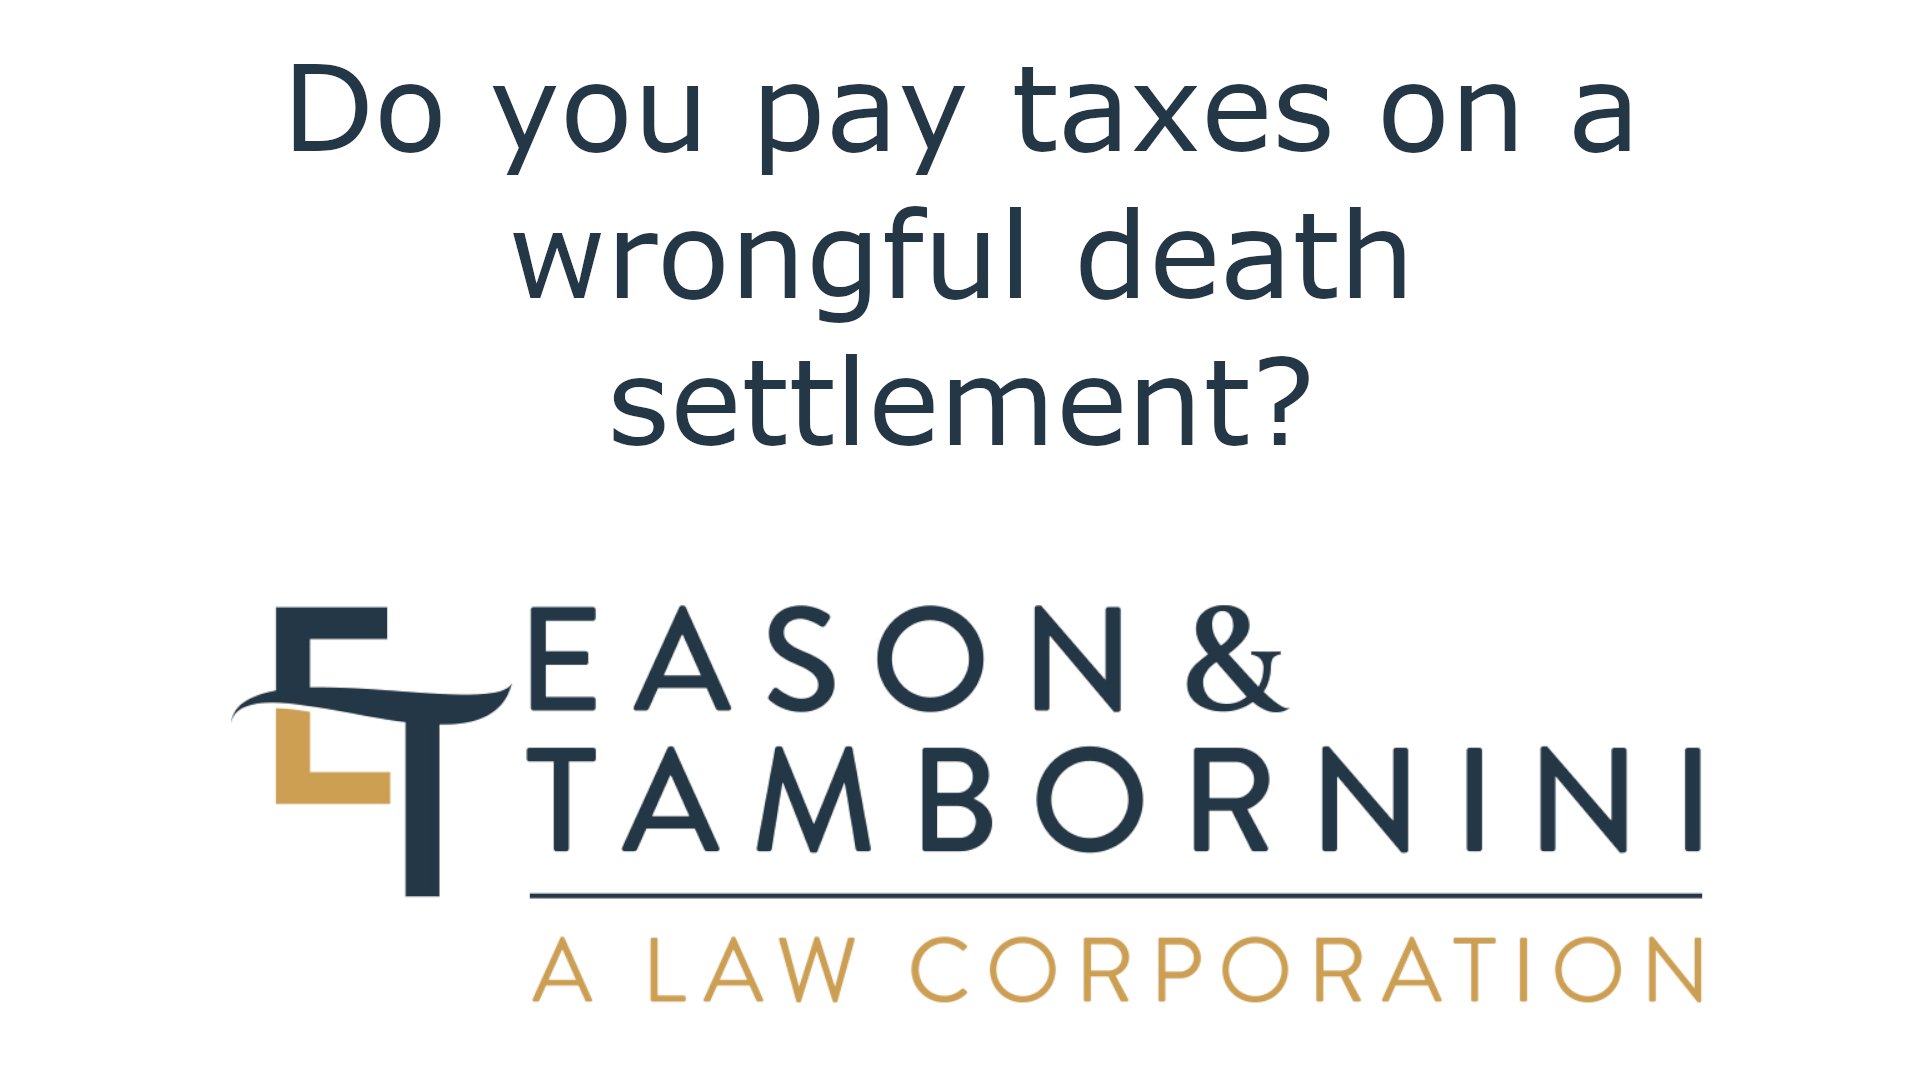 Do you pay taxes on a wrongful death settlement?